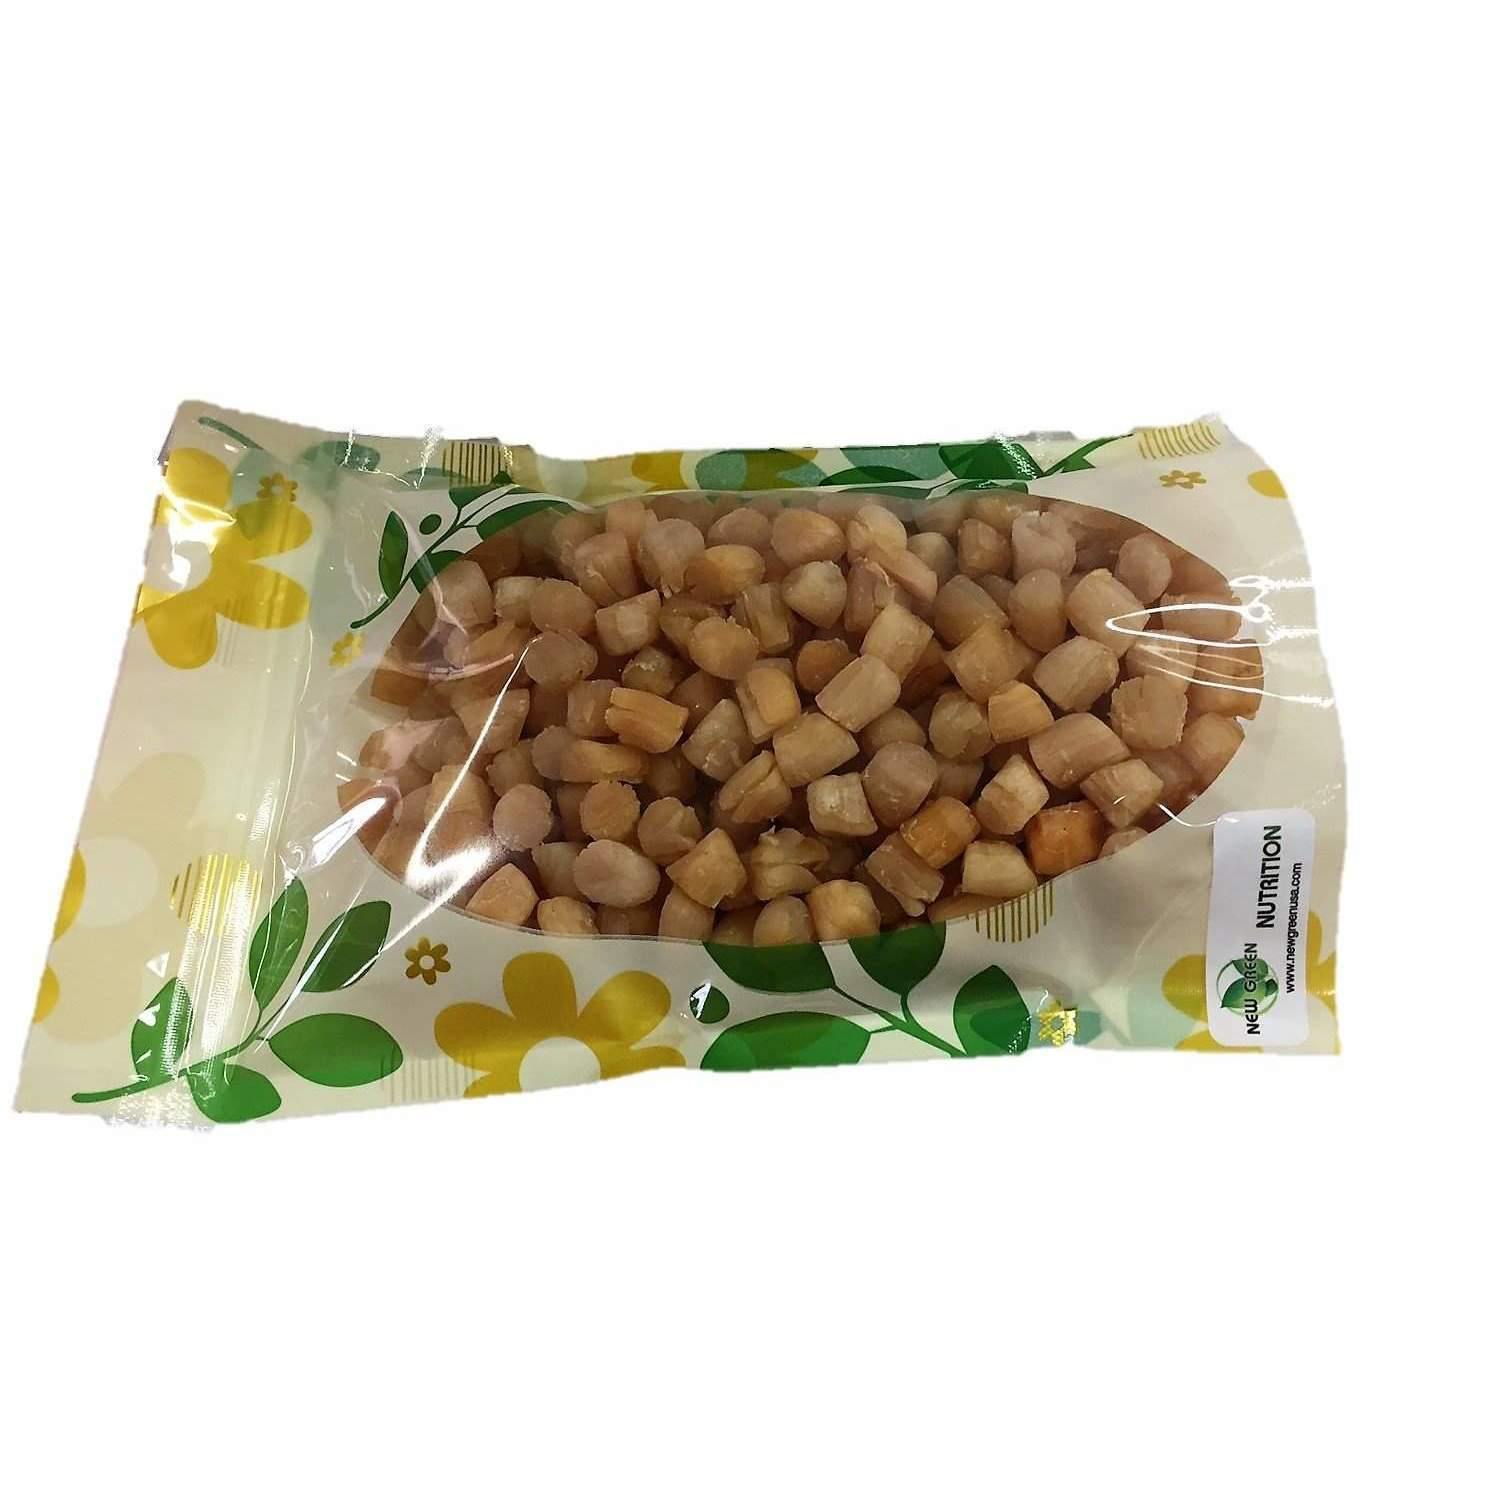 Dried Qingdao Small Scallops (2lb) + 8oz. Free - Buy at New Green Nutrition